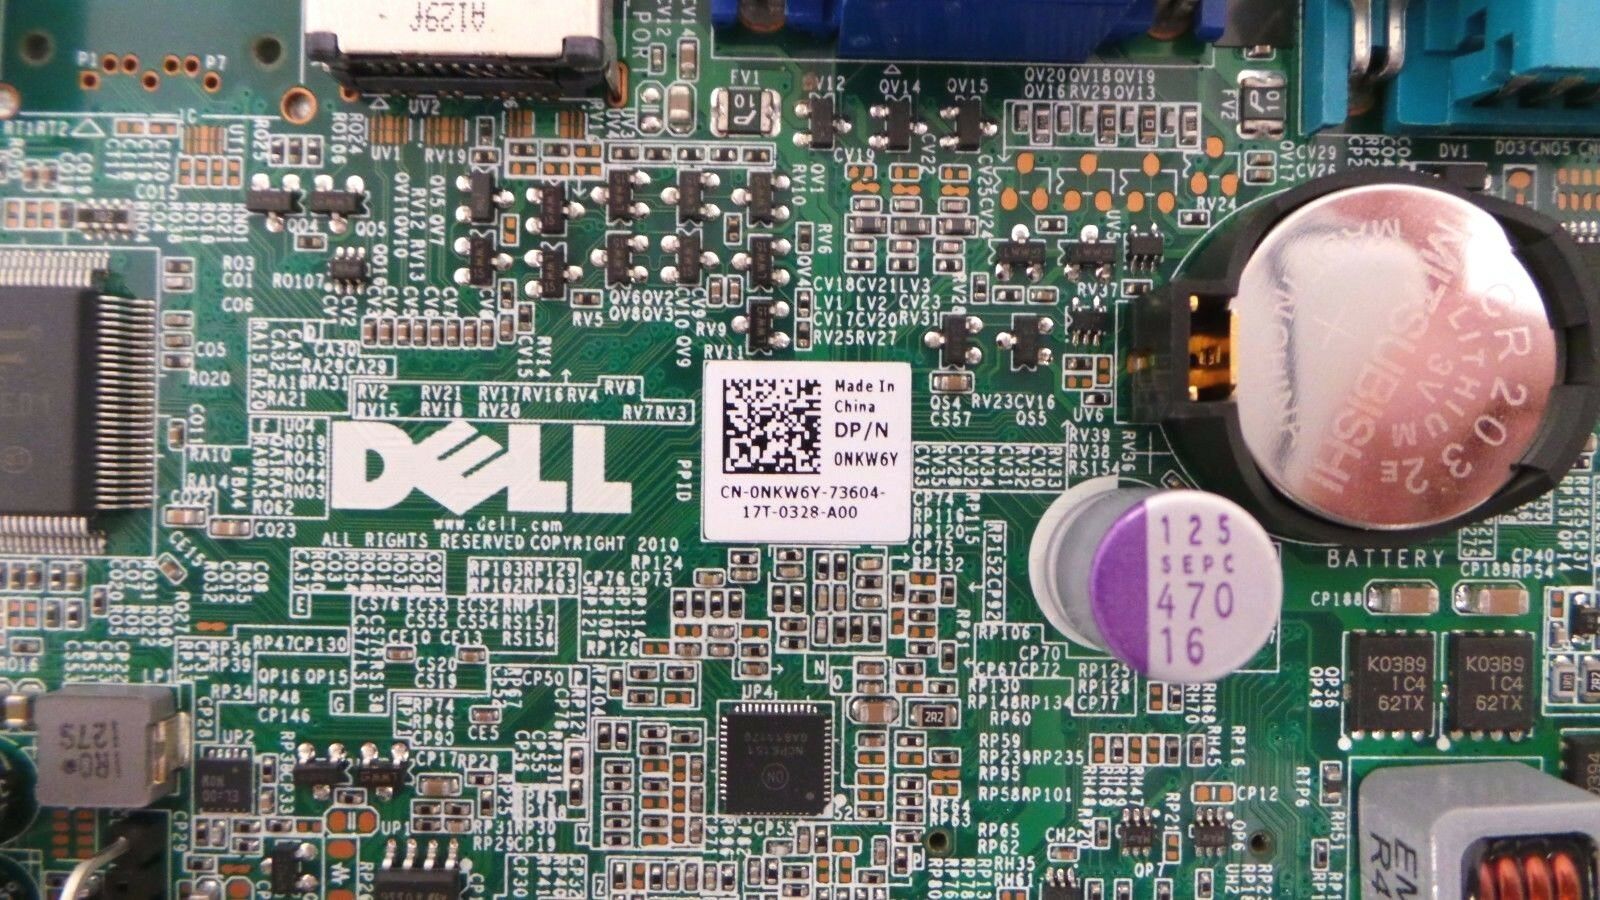 Dell 0NKW6Y OptiPlex 790 USFF Motherboard, Used